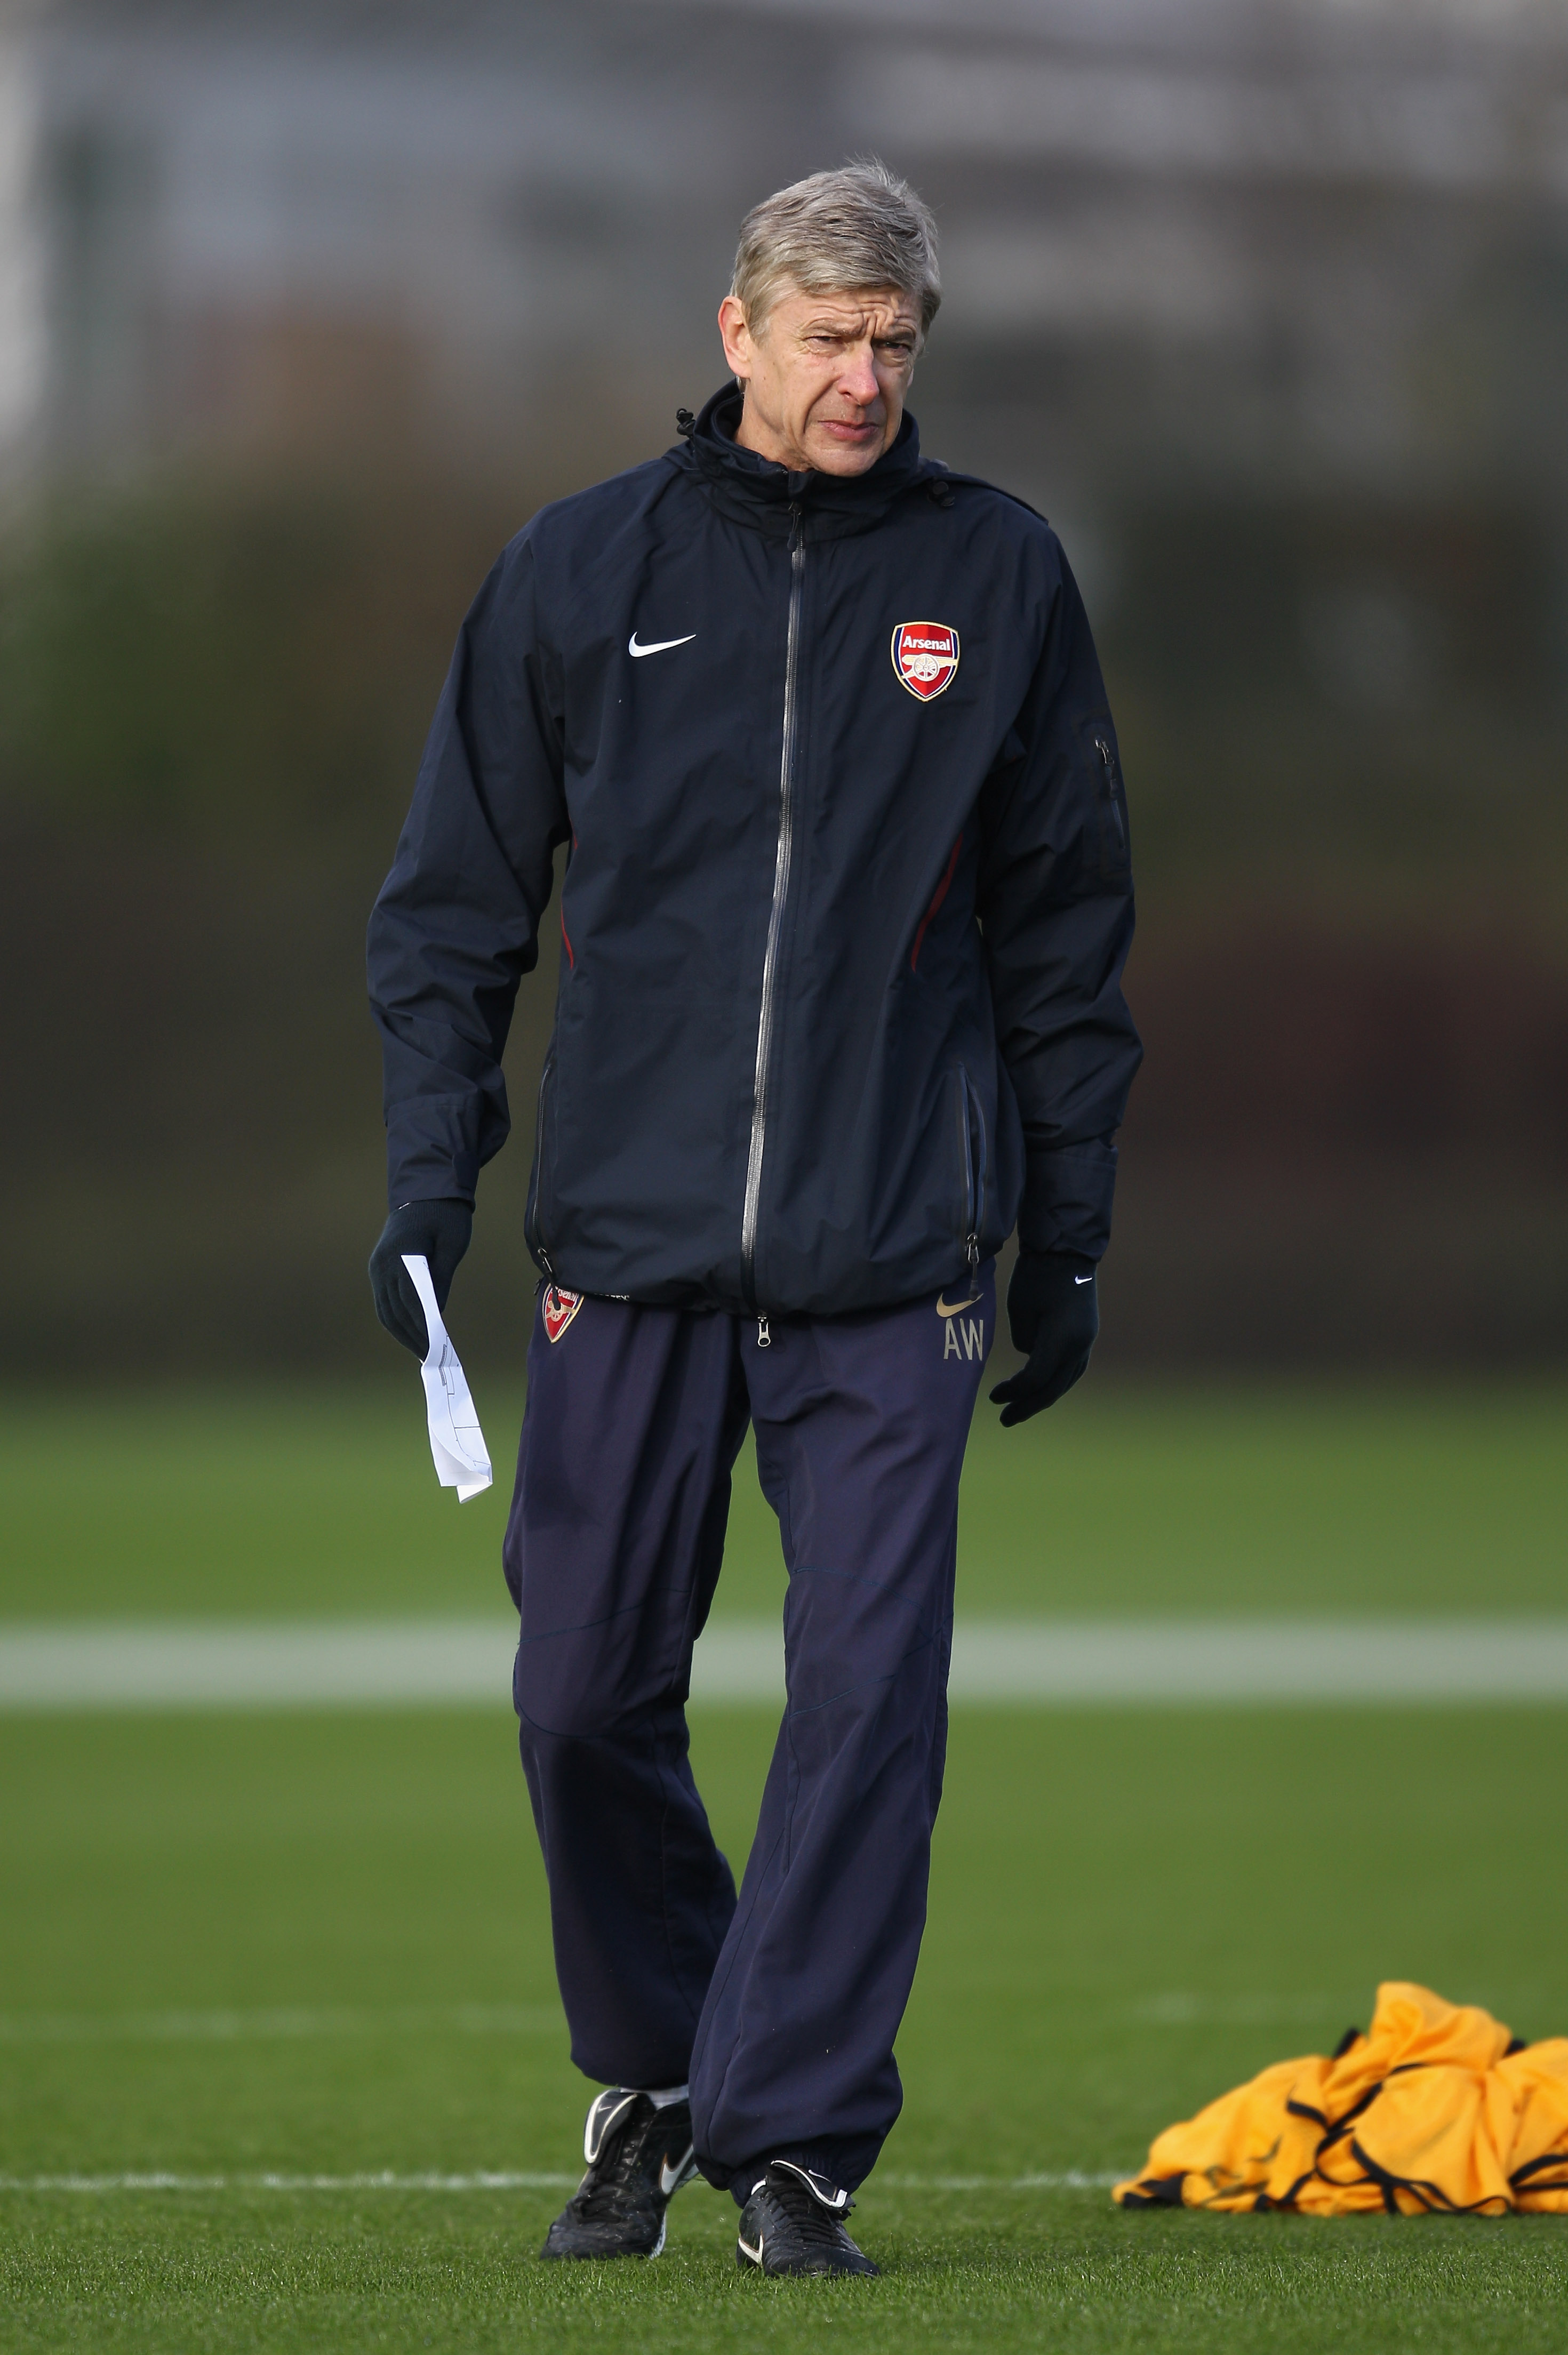 ST ALBANS, ENGLAND - DECEMBER 07:  Arsenal manager Arsene Wenger during training at London Colney on December 7, 2010 in St Albans, England.  (Photo by Paul Gilham/Getty Images)